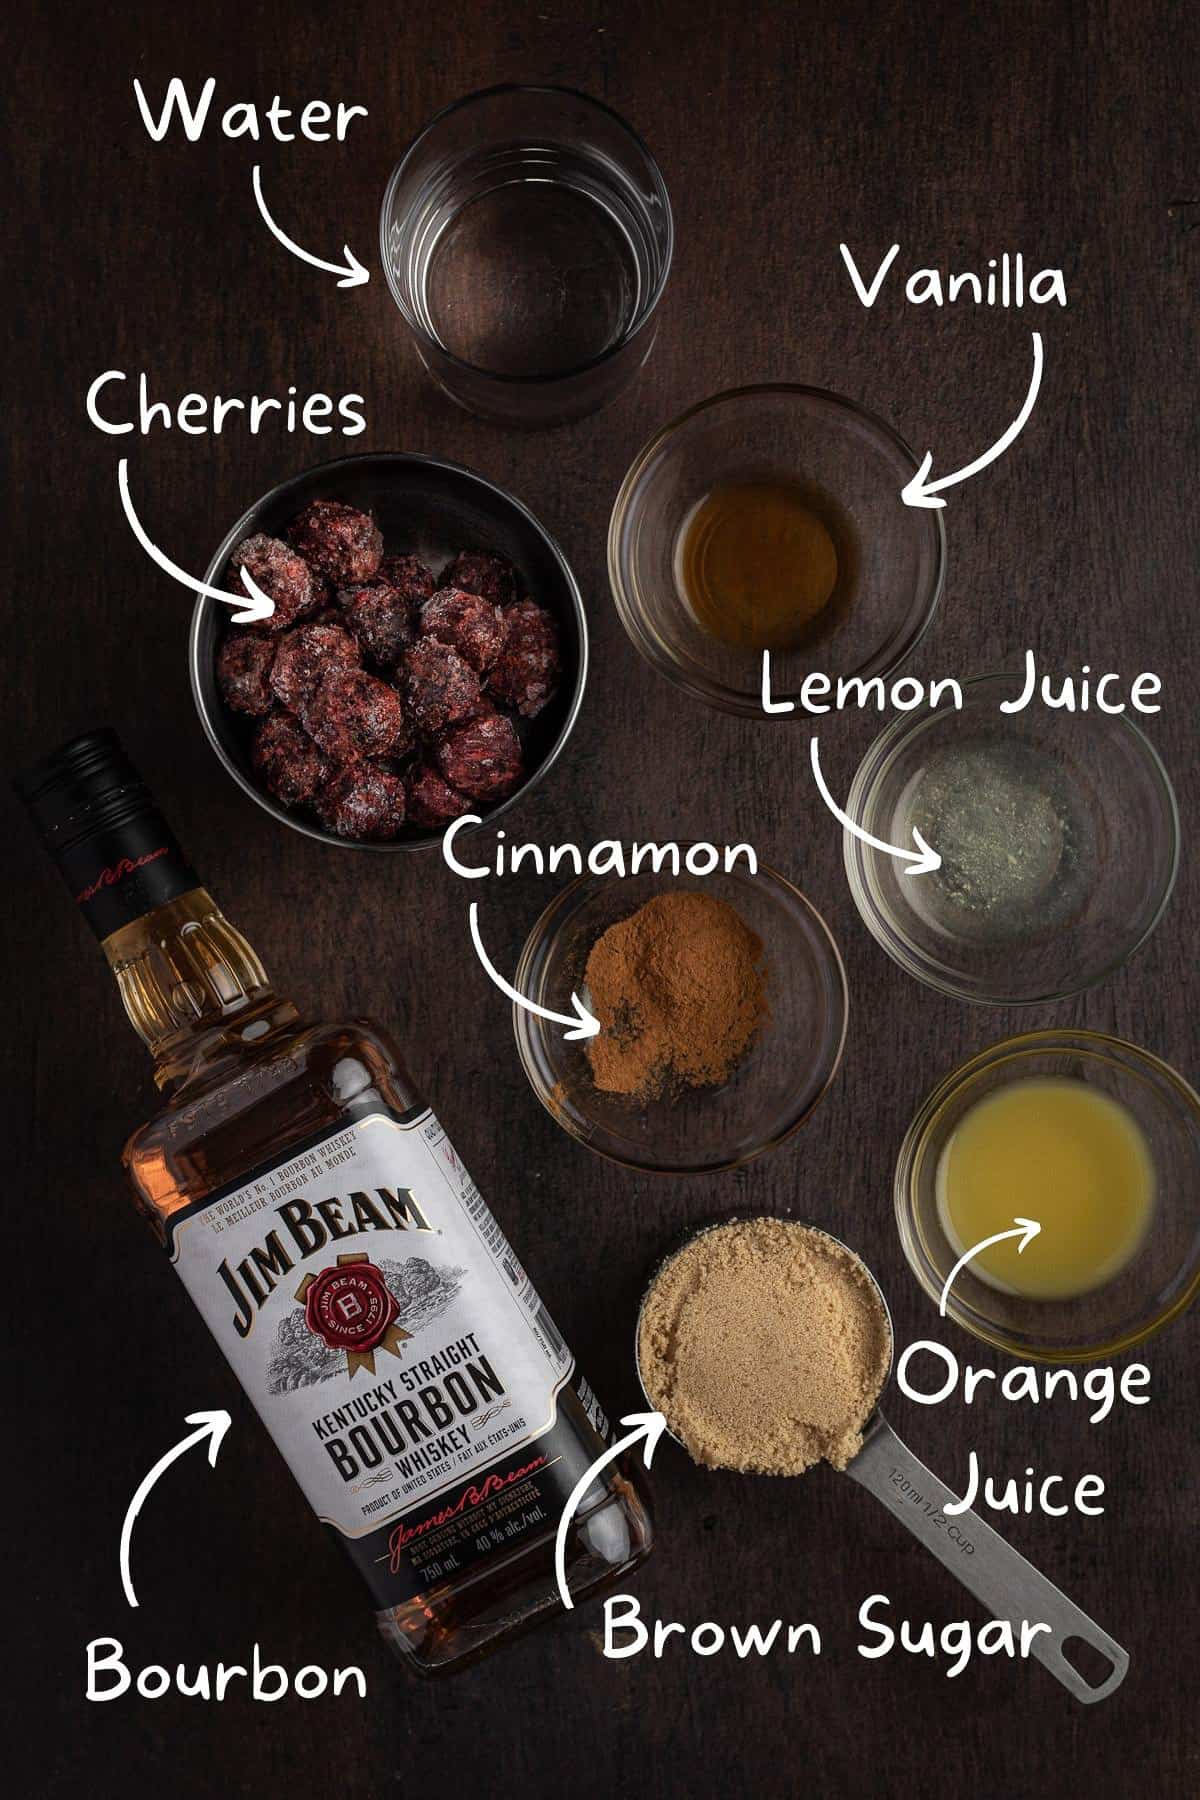 All the ingredients needed to make the cocktail.